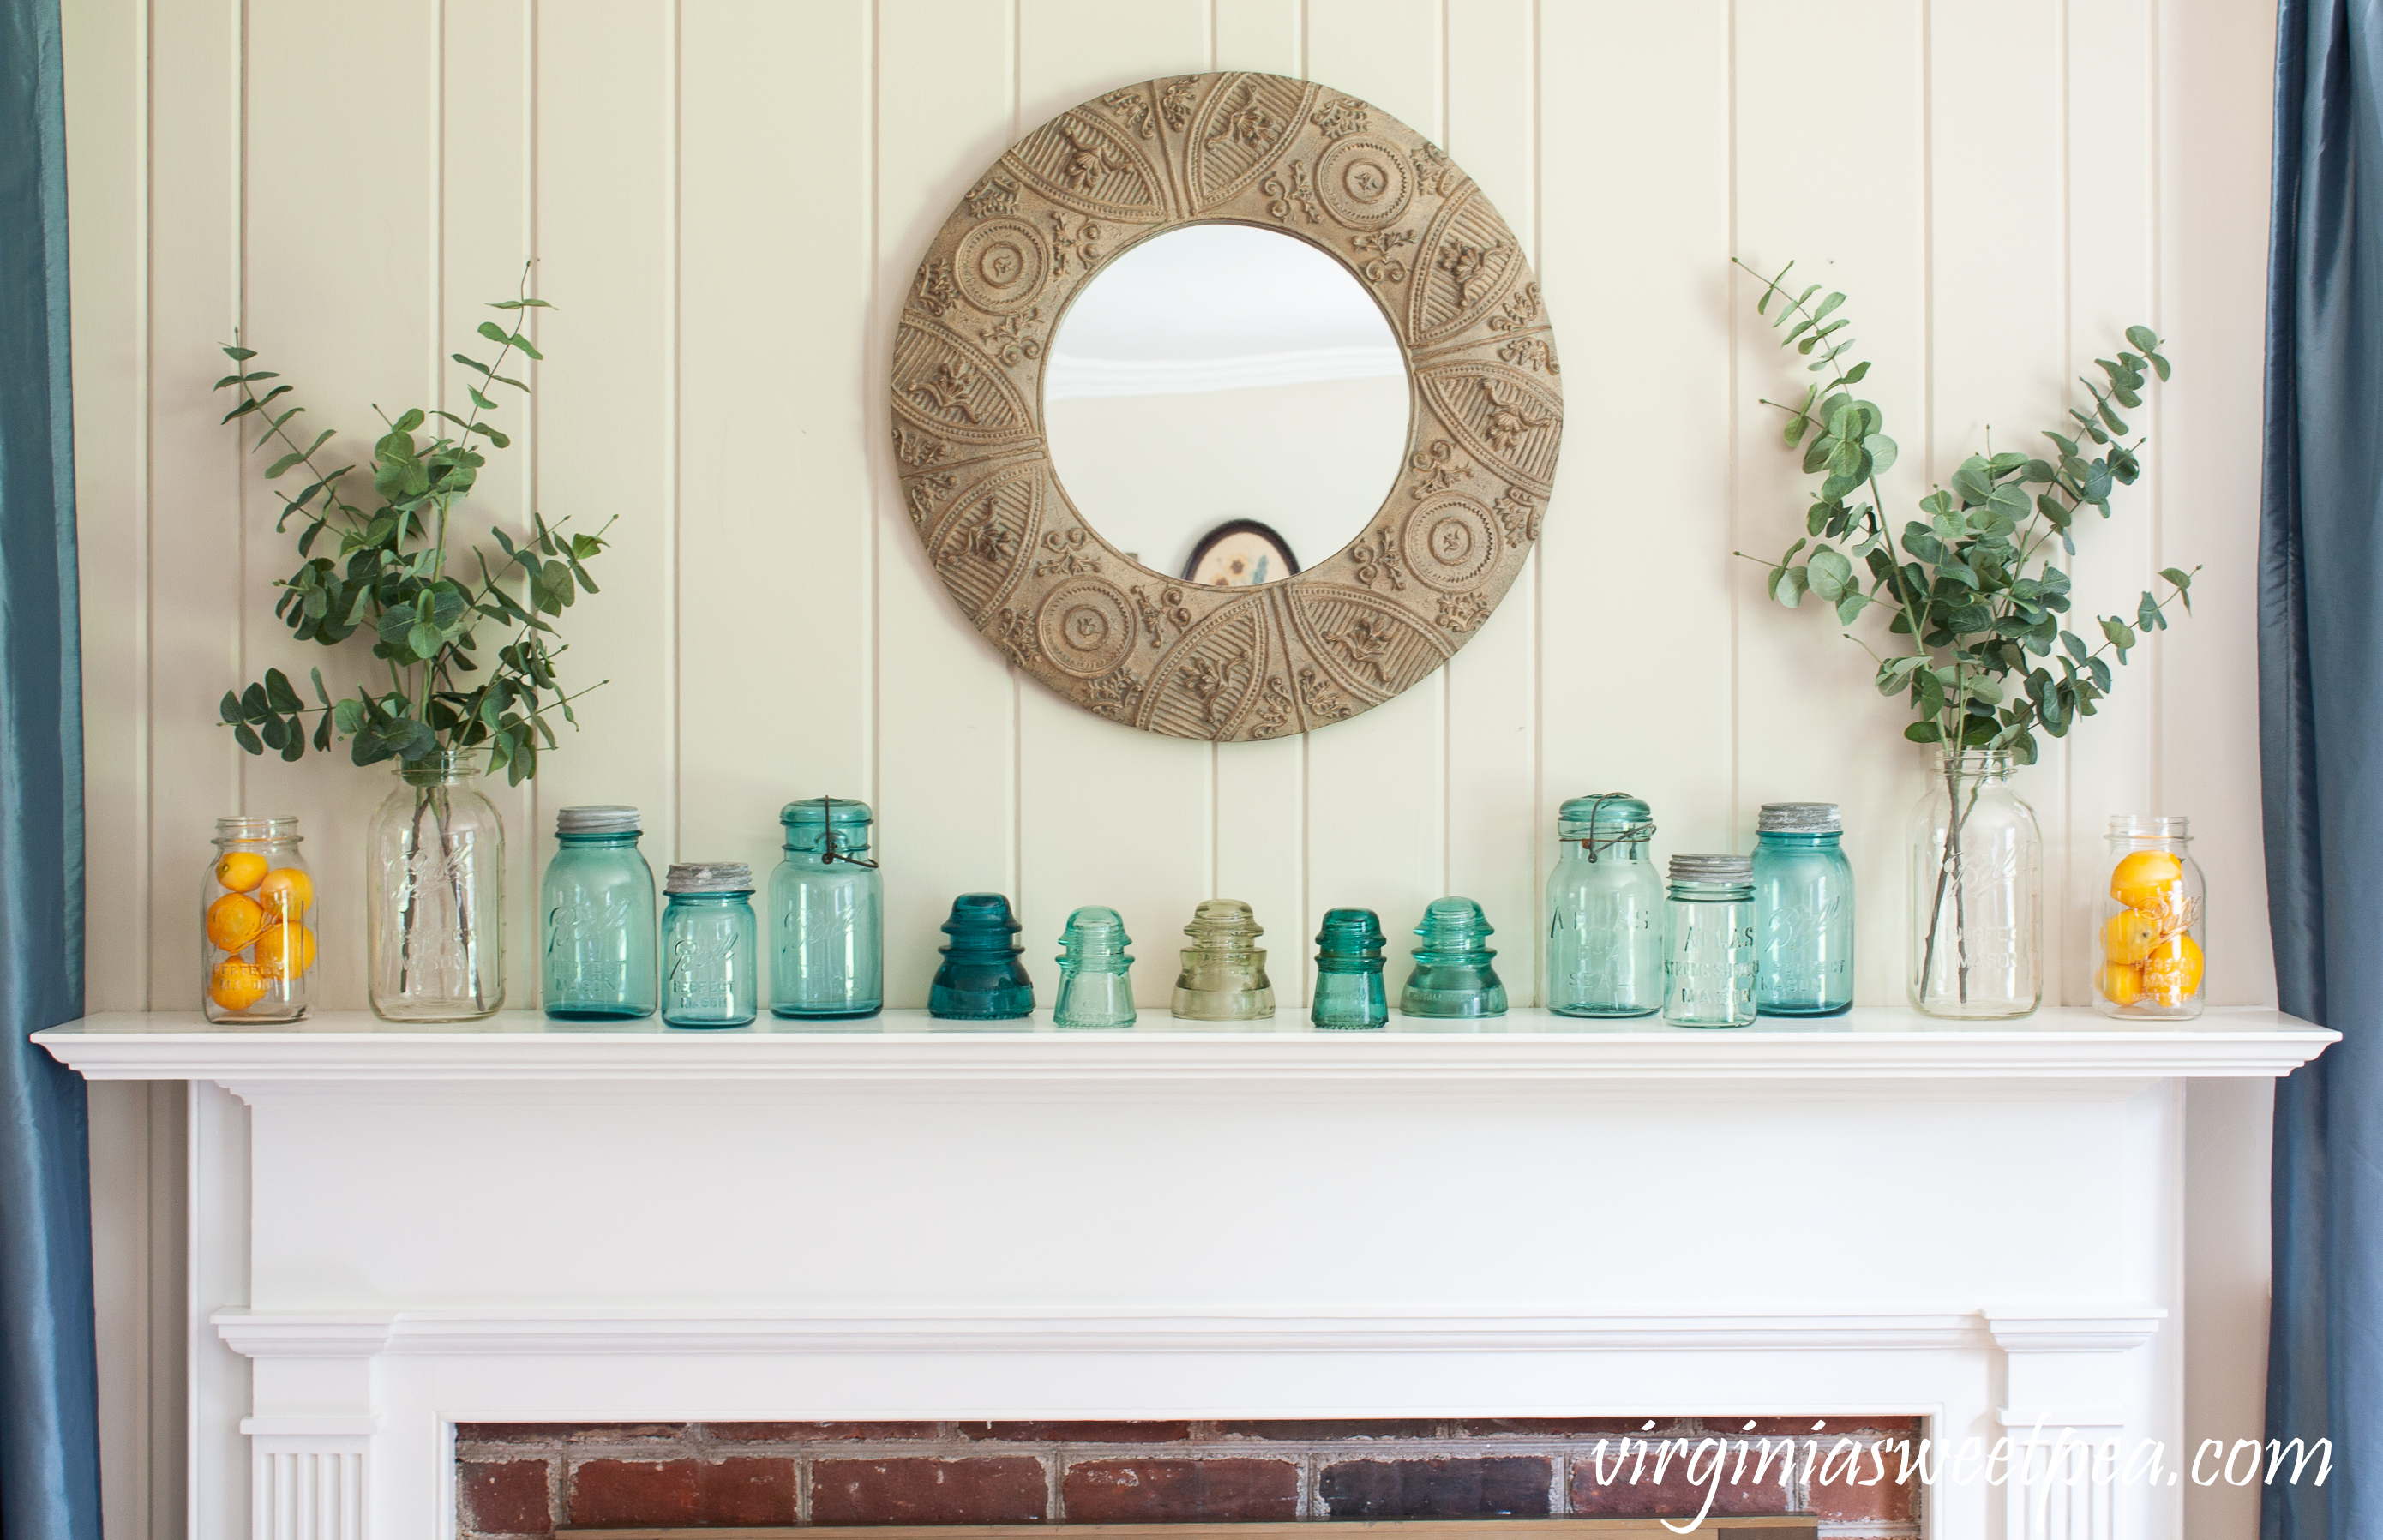 Summer Mantel Decorated with Blue and clear glass Ball Jars, insulators, and lemons.